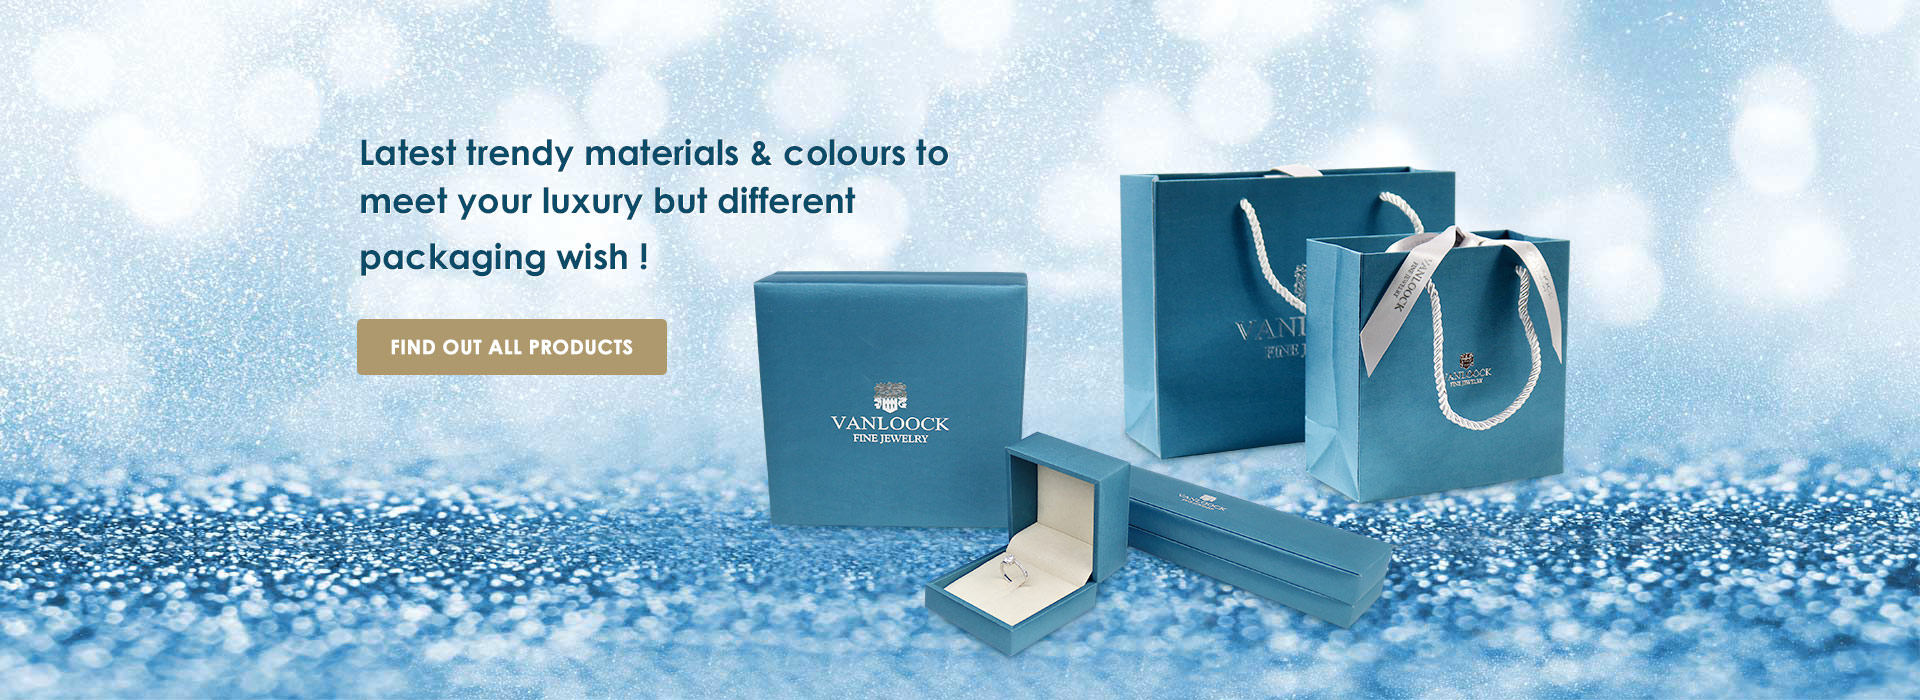 latest trendy materials and colours to meet your luxury but different packaging wish